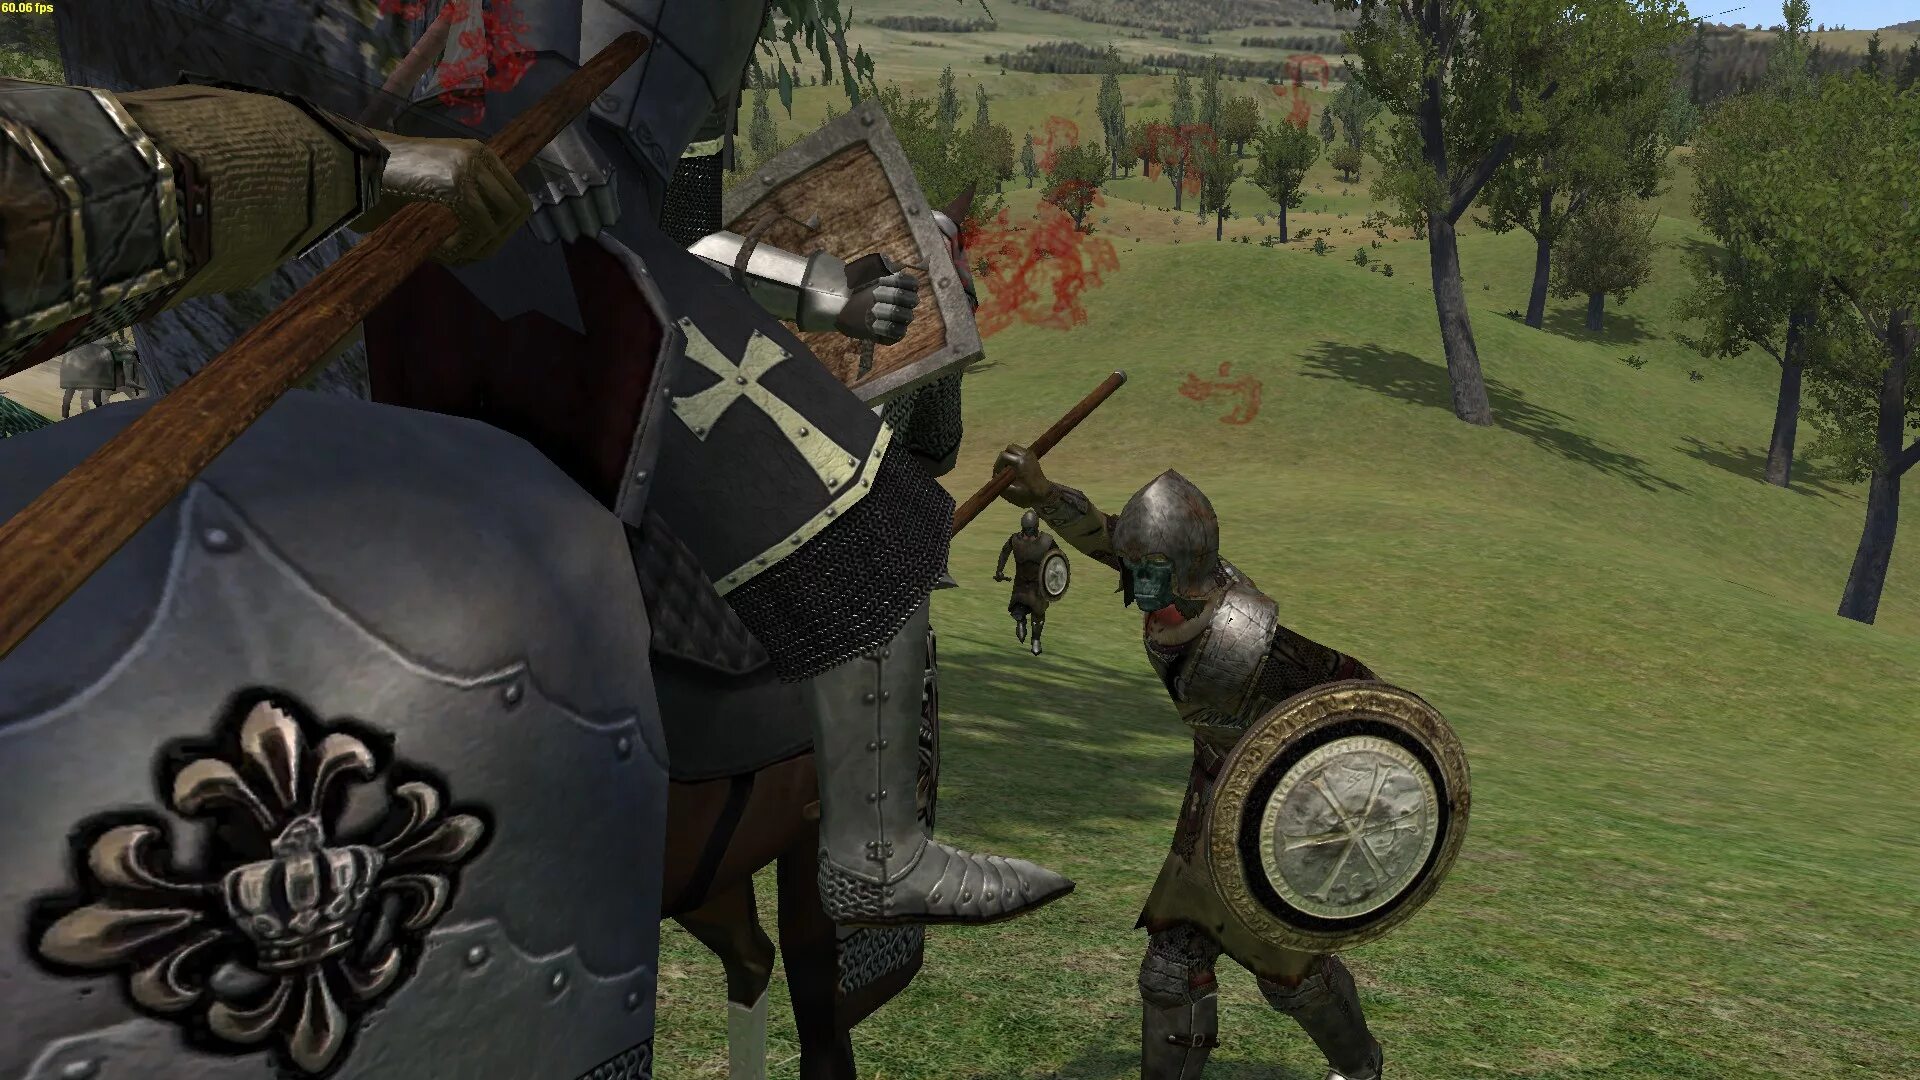 Mount and Blade Prophesy of Pendor 3.9.5. Mount and Blade Bannerlord Prophesy of Pendor. Warband Pendor. Рыцари Пендора игра.